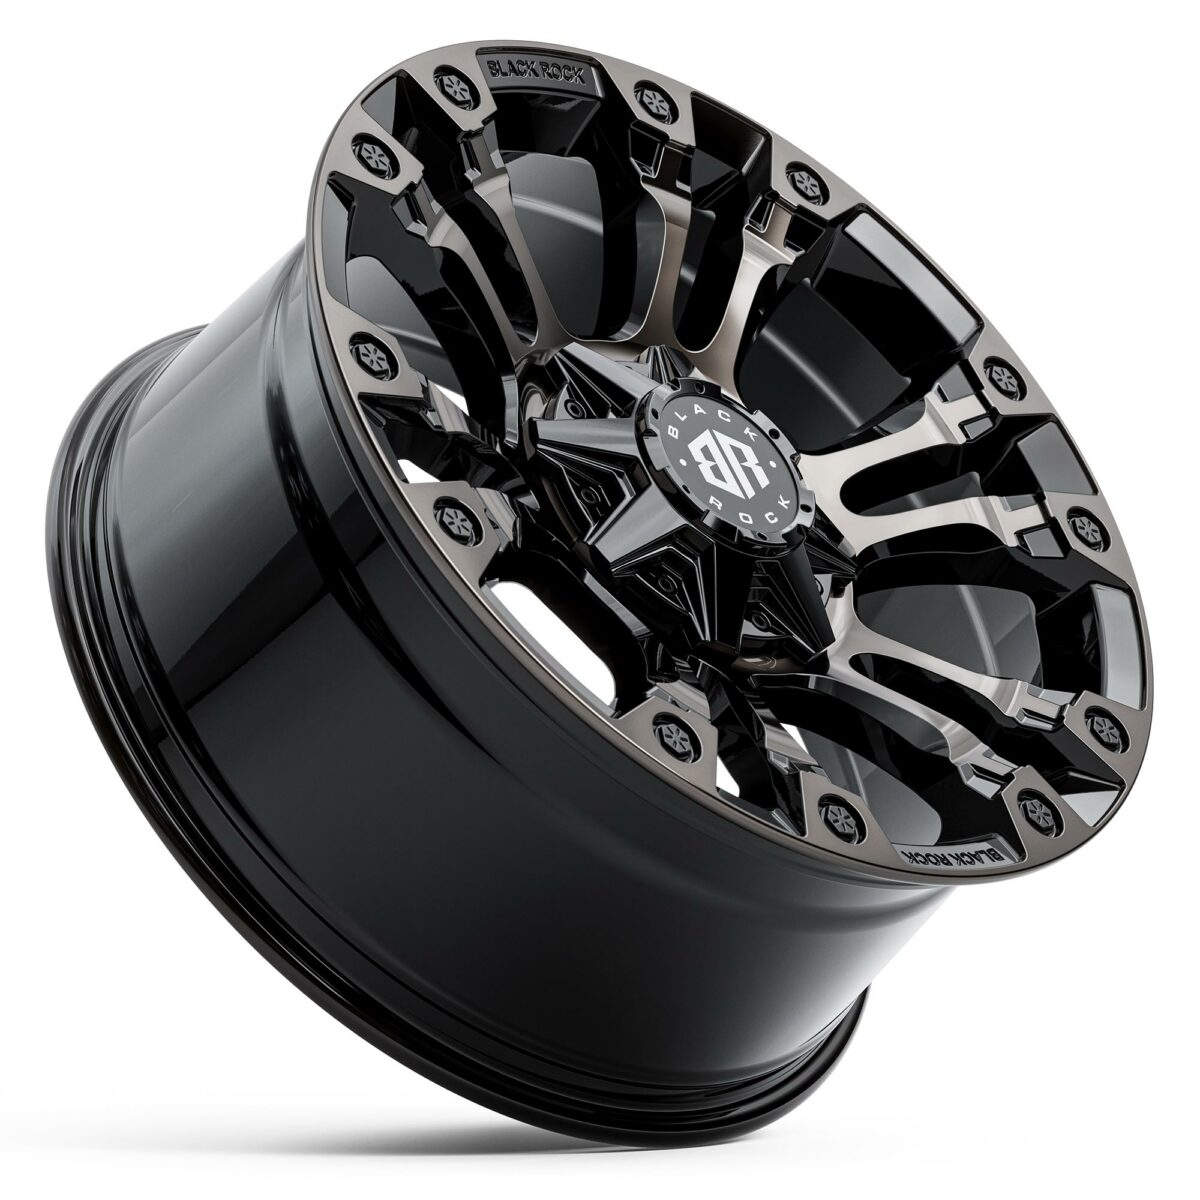 Black Rock Forcer Gloss Black Tinted Wheels 4x4 Rims 20 inch Off-Road